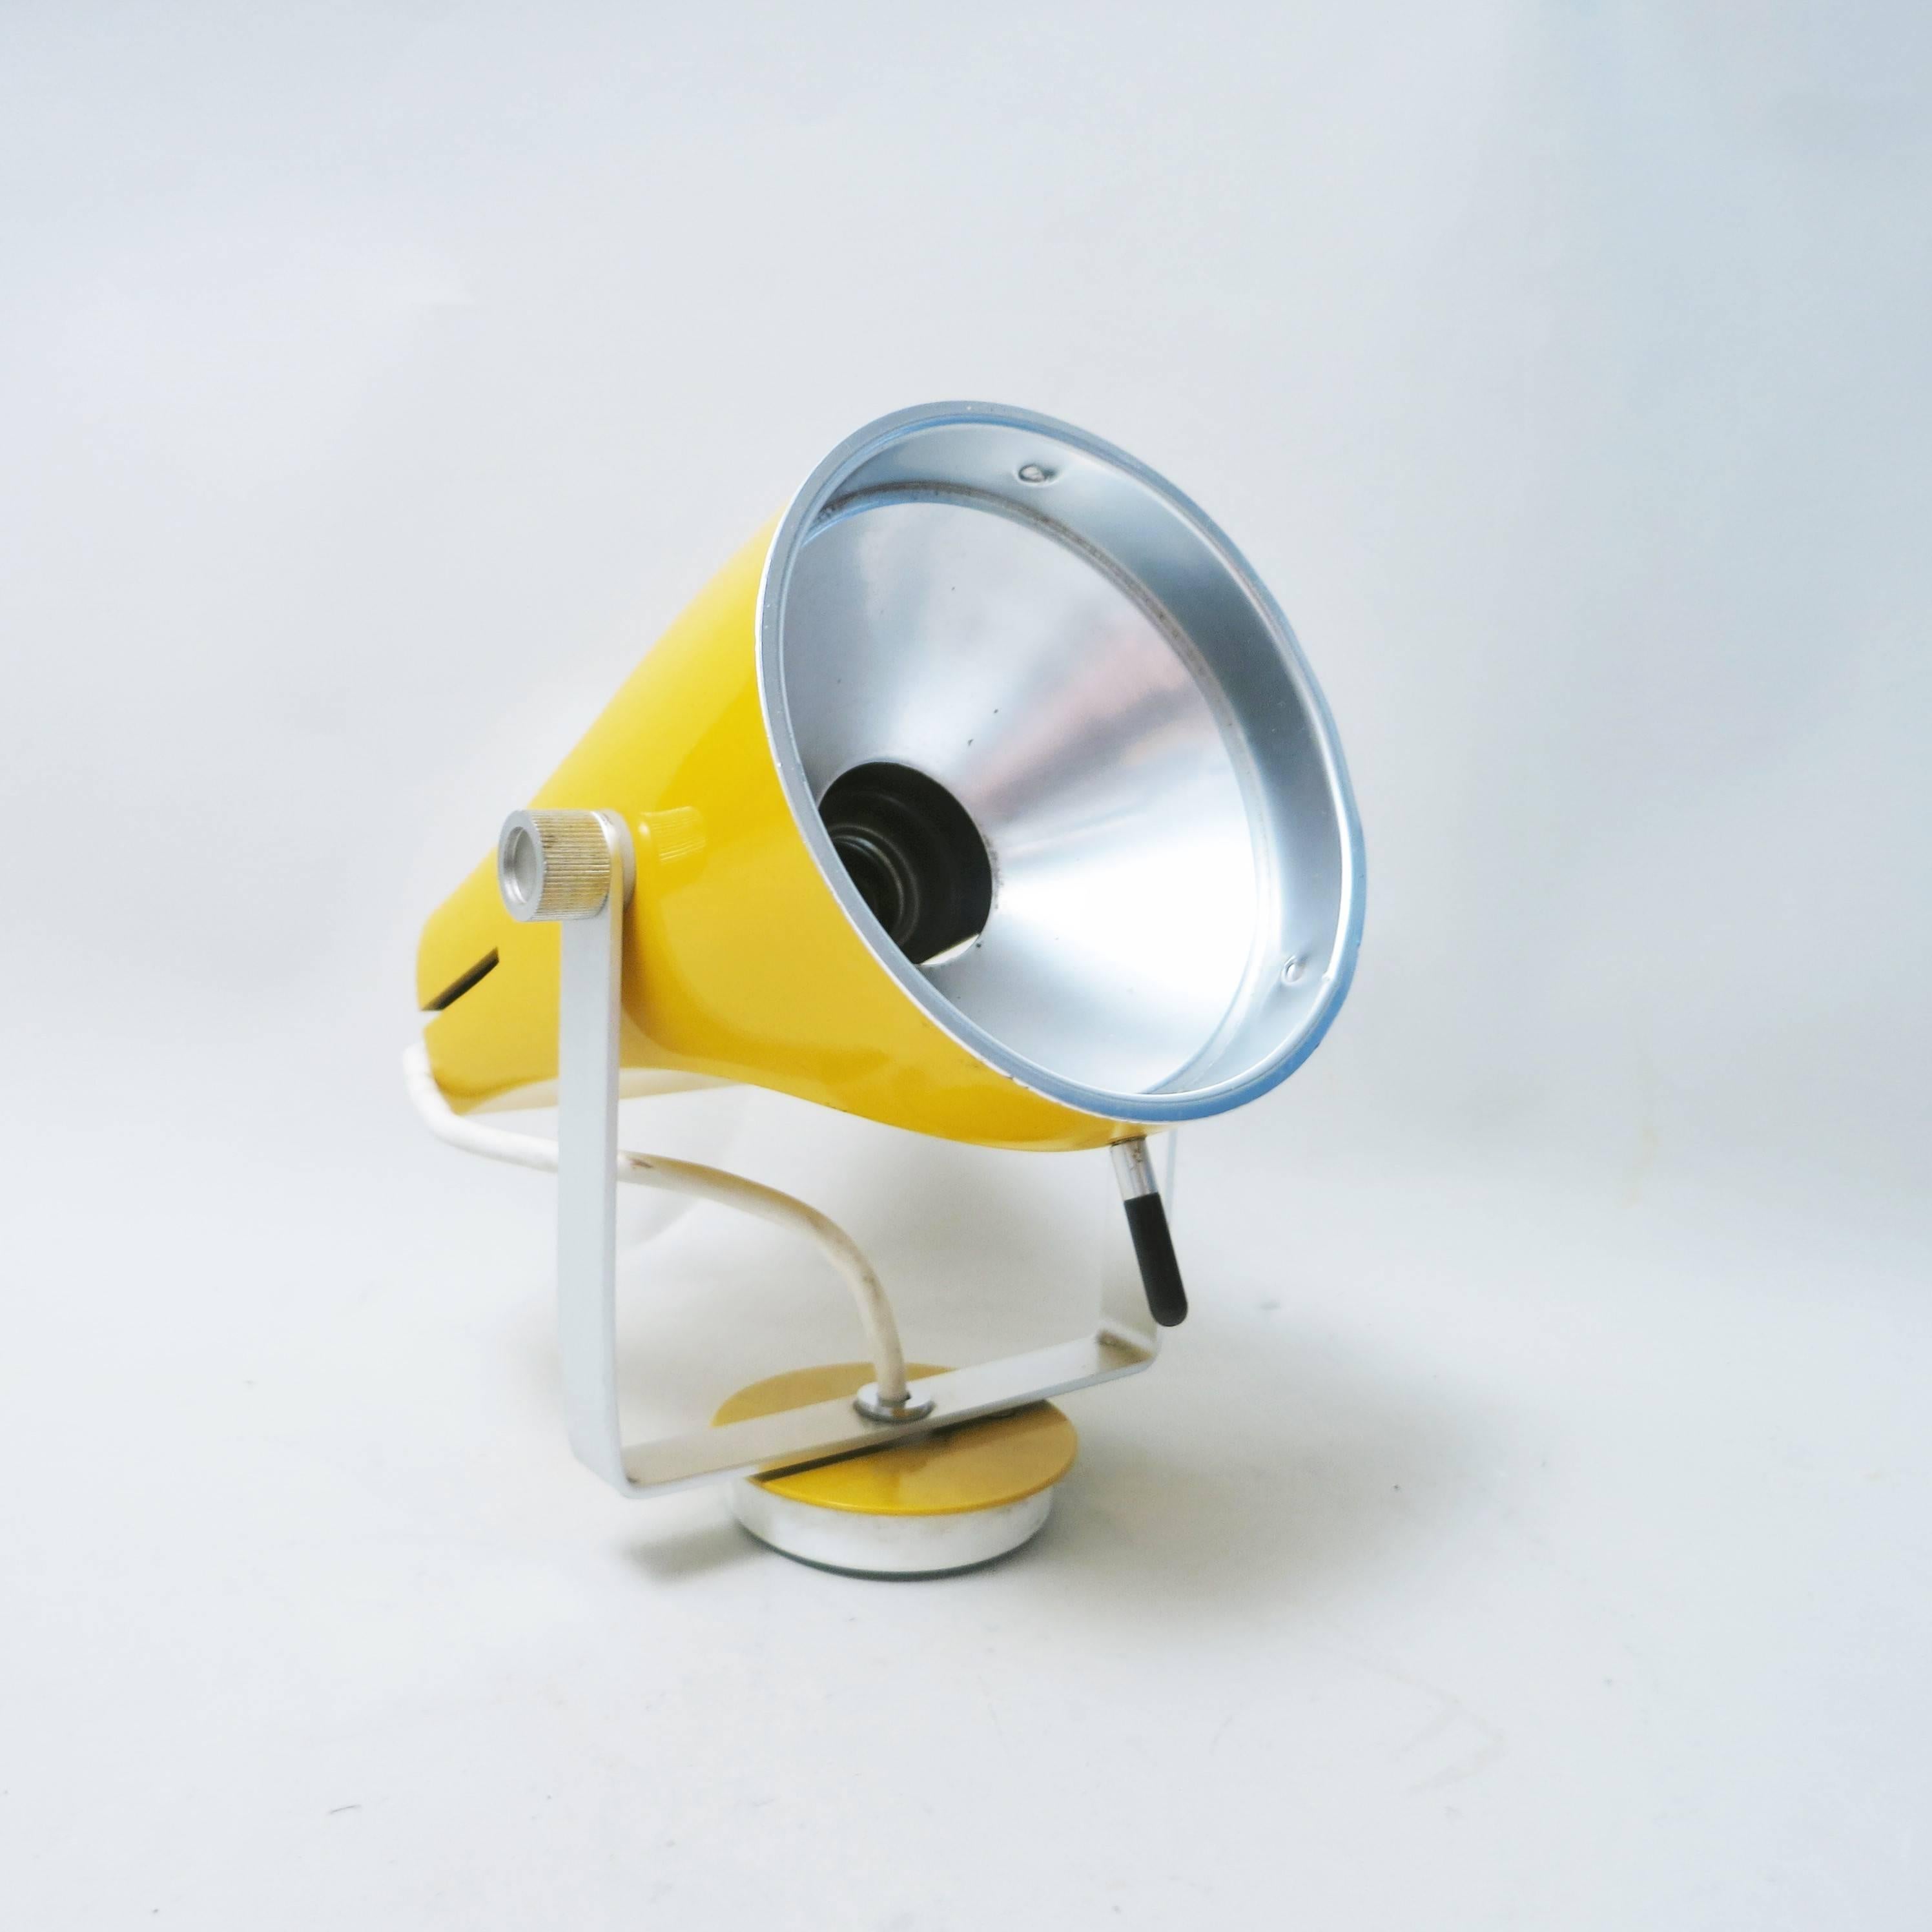 Modernist orientable yellow wall lamp designed by Etienne Fermigier and produced by Disderot in 1967 in France.